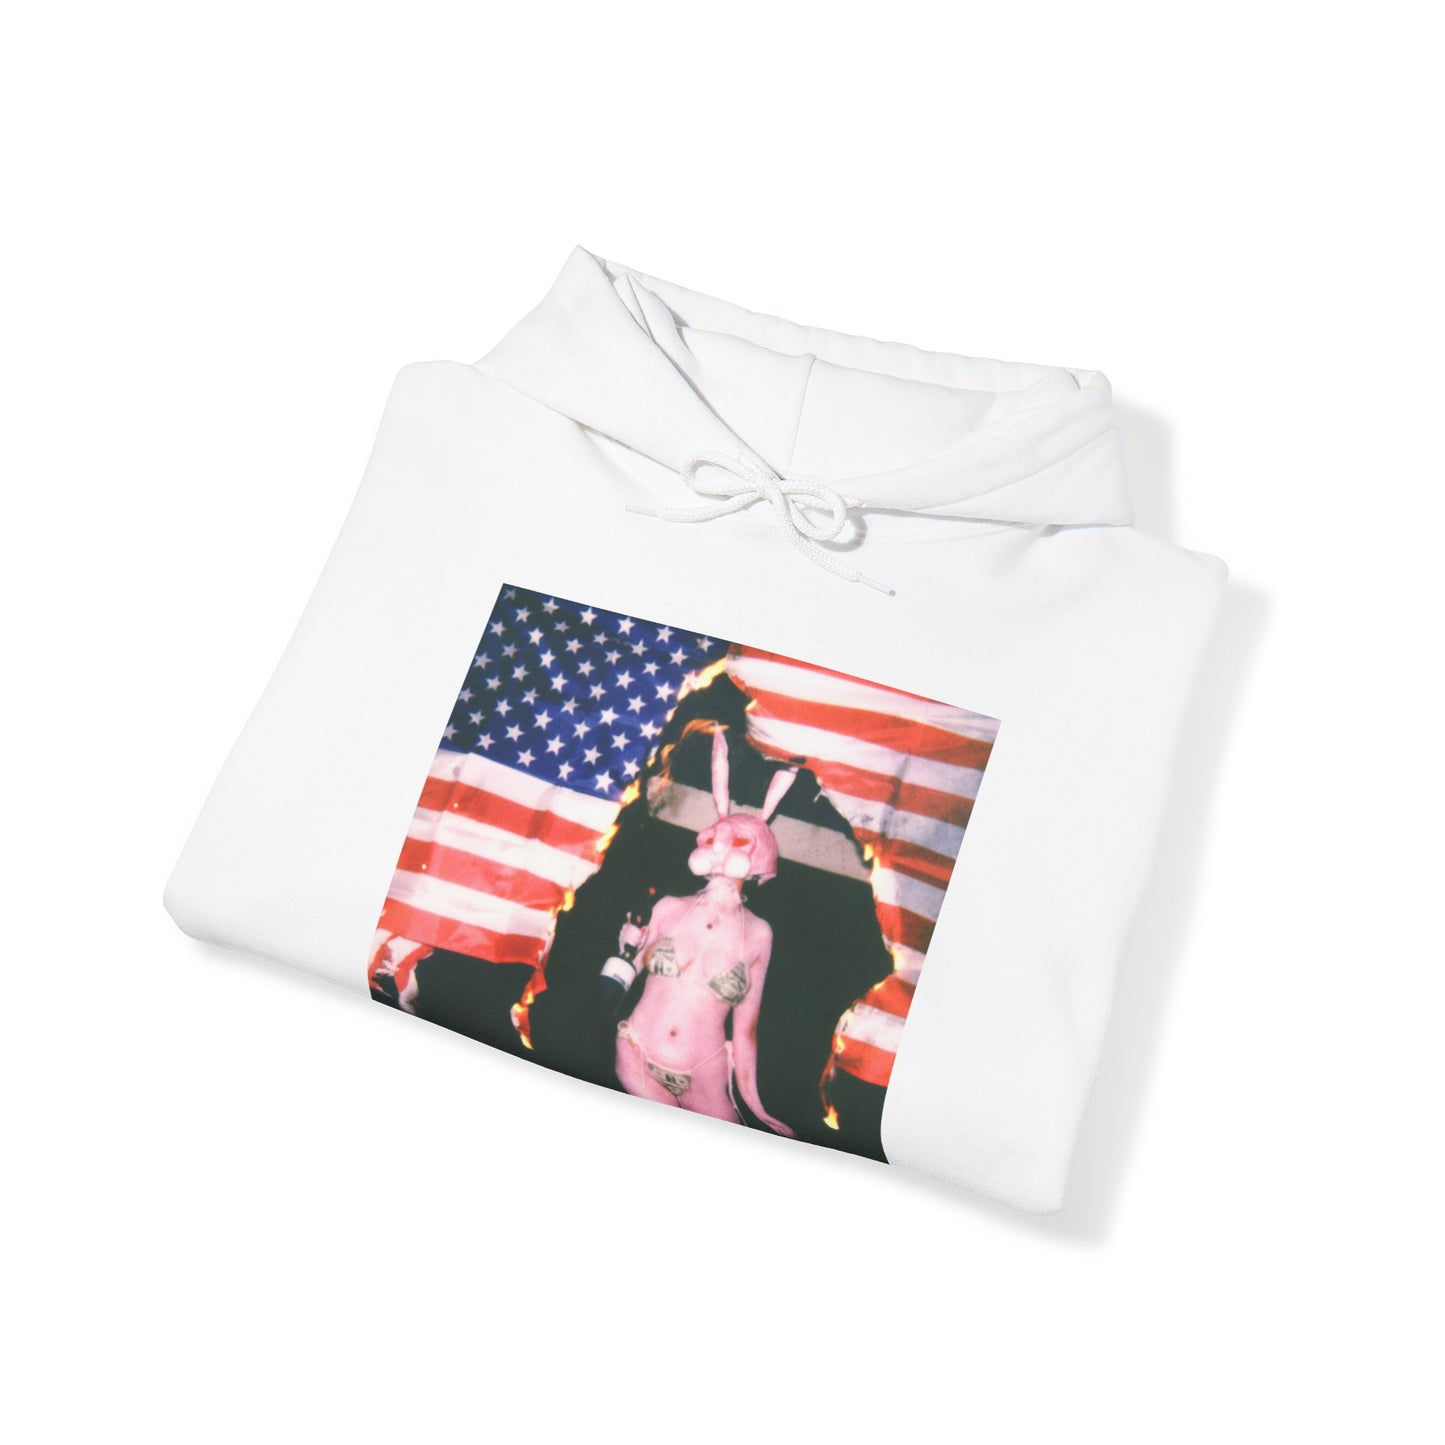 the Bunny Bless America Hoodie